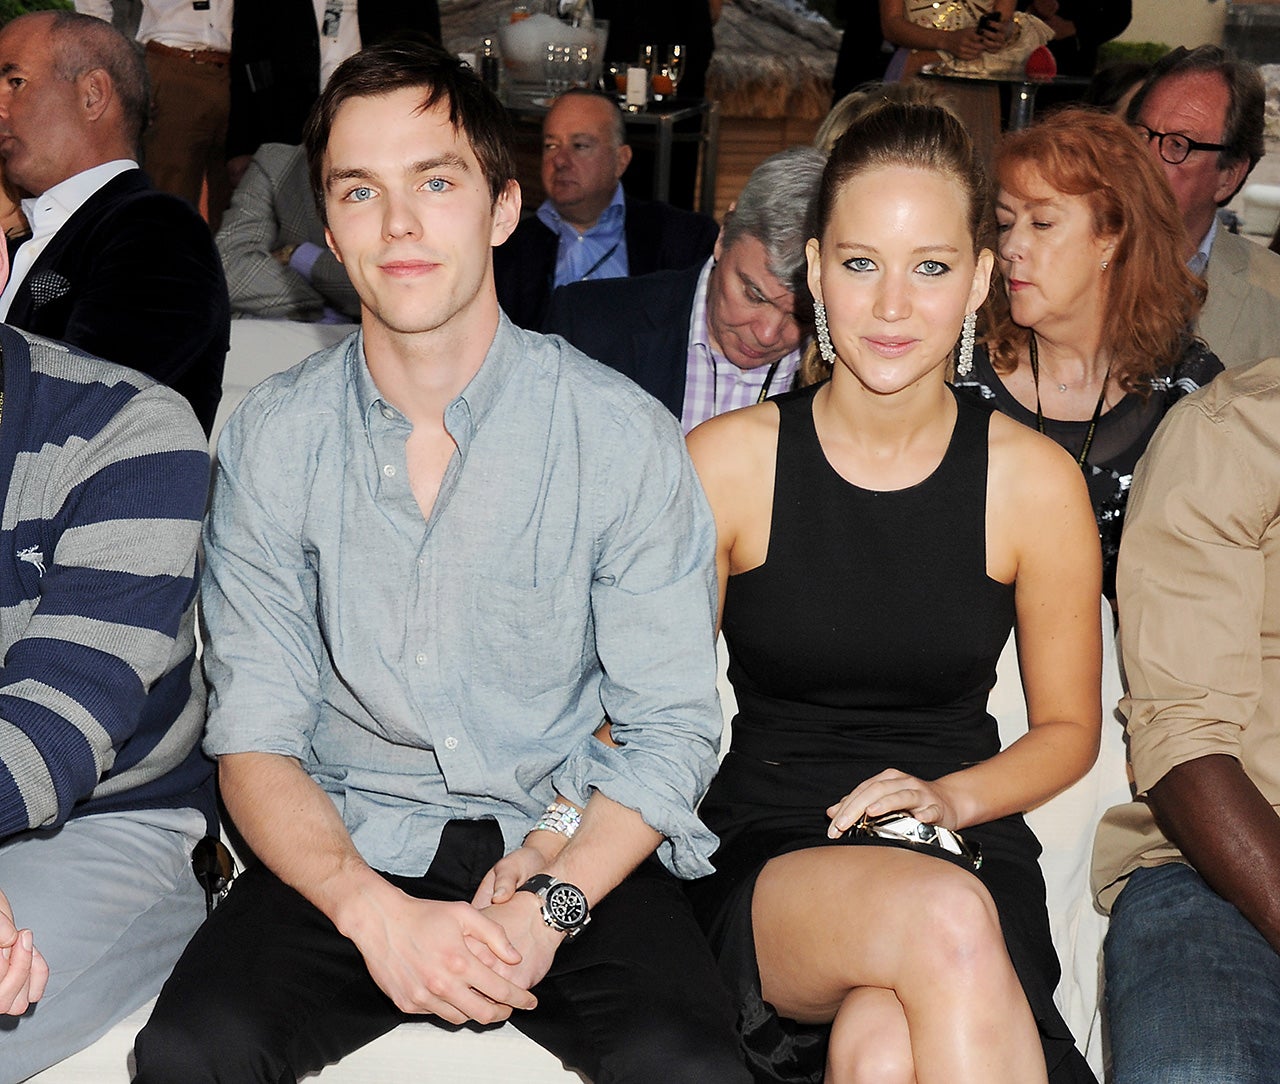 Jennifer Lawrence and Nicholas Hoult in 2012